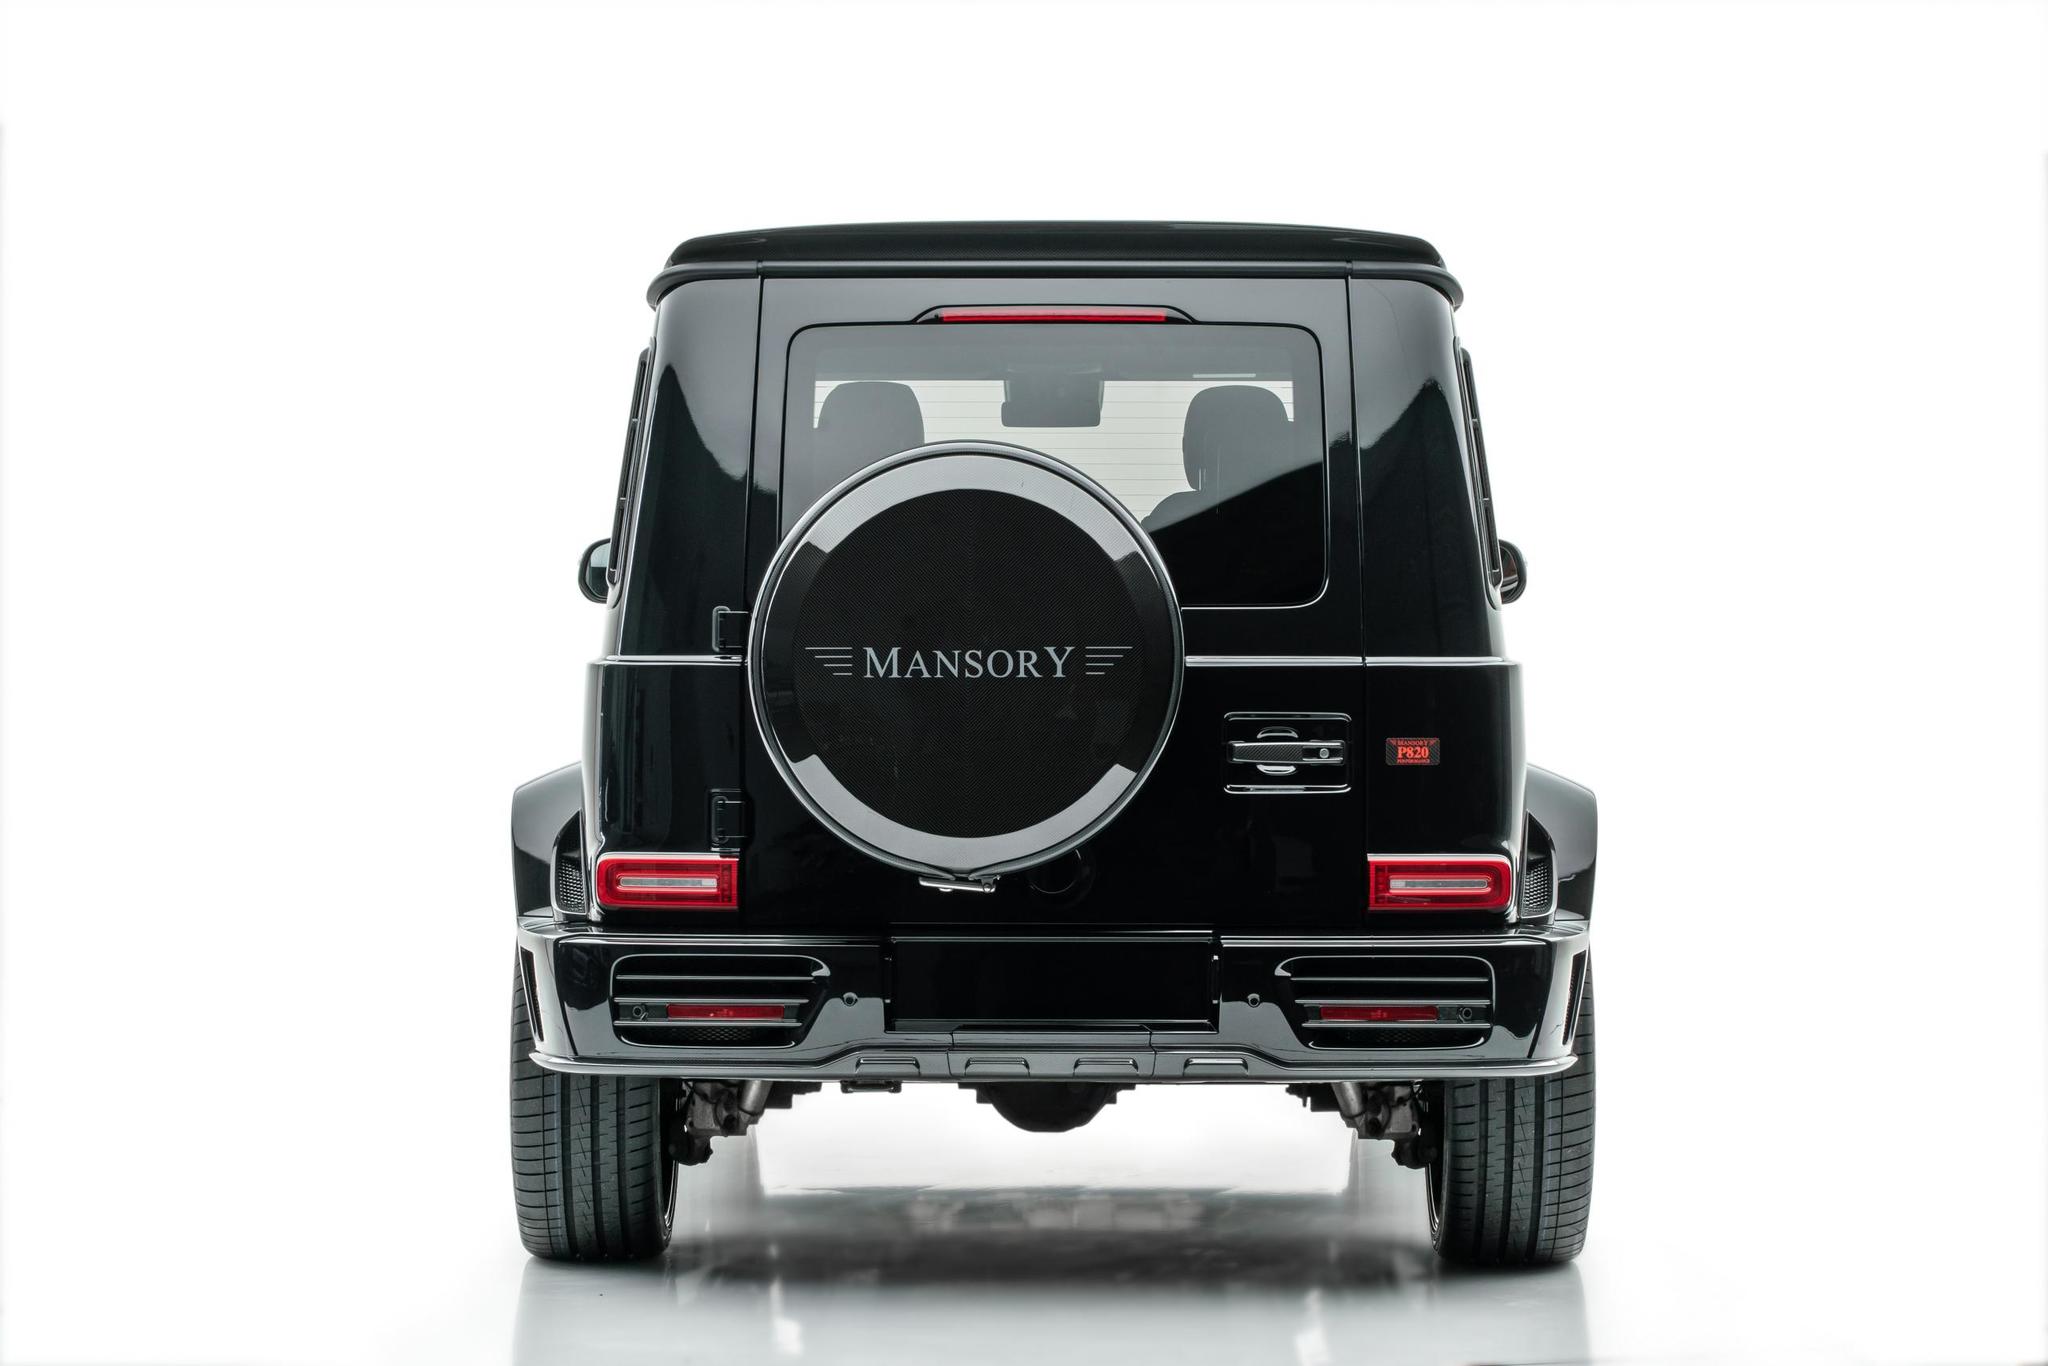 Mansory body kit for Mercedes G-class carbon